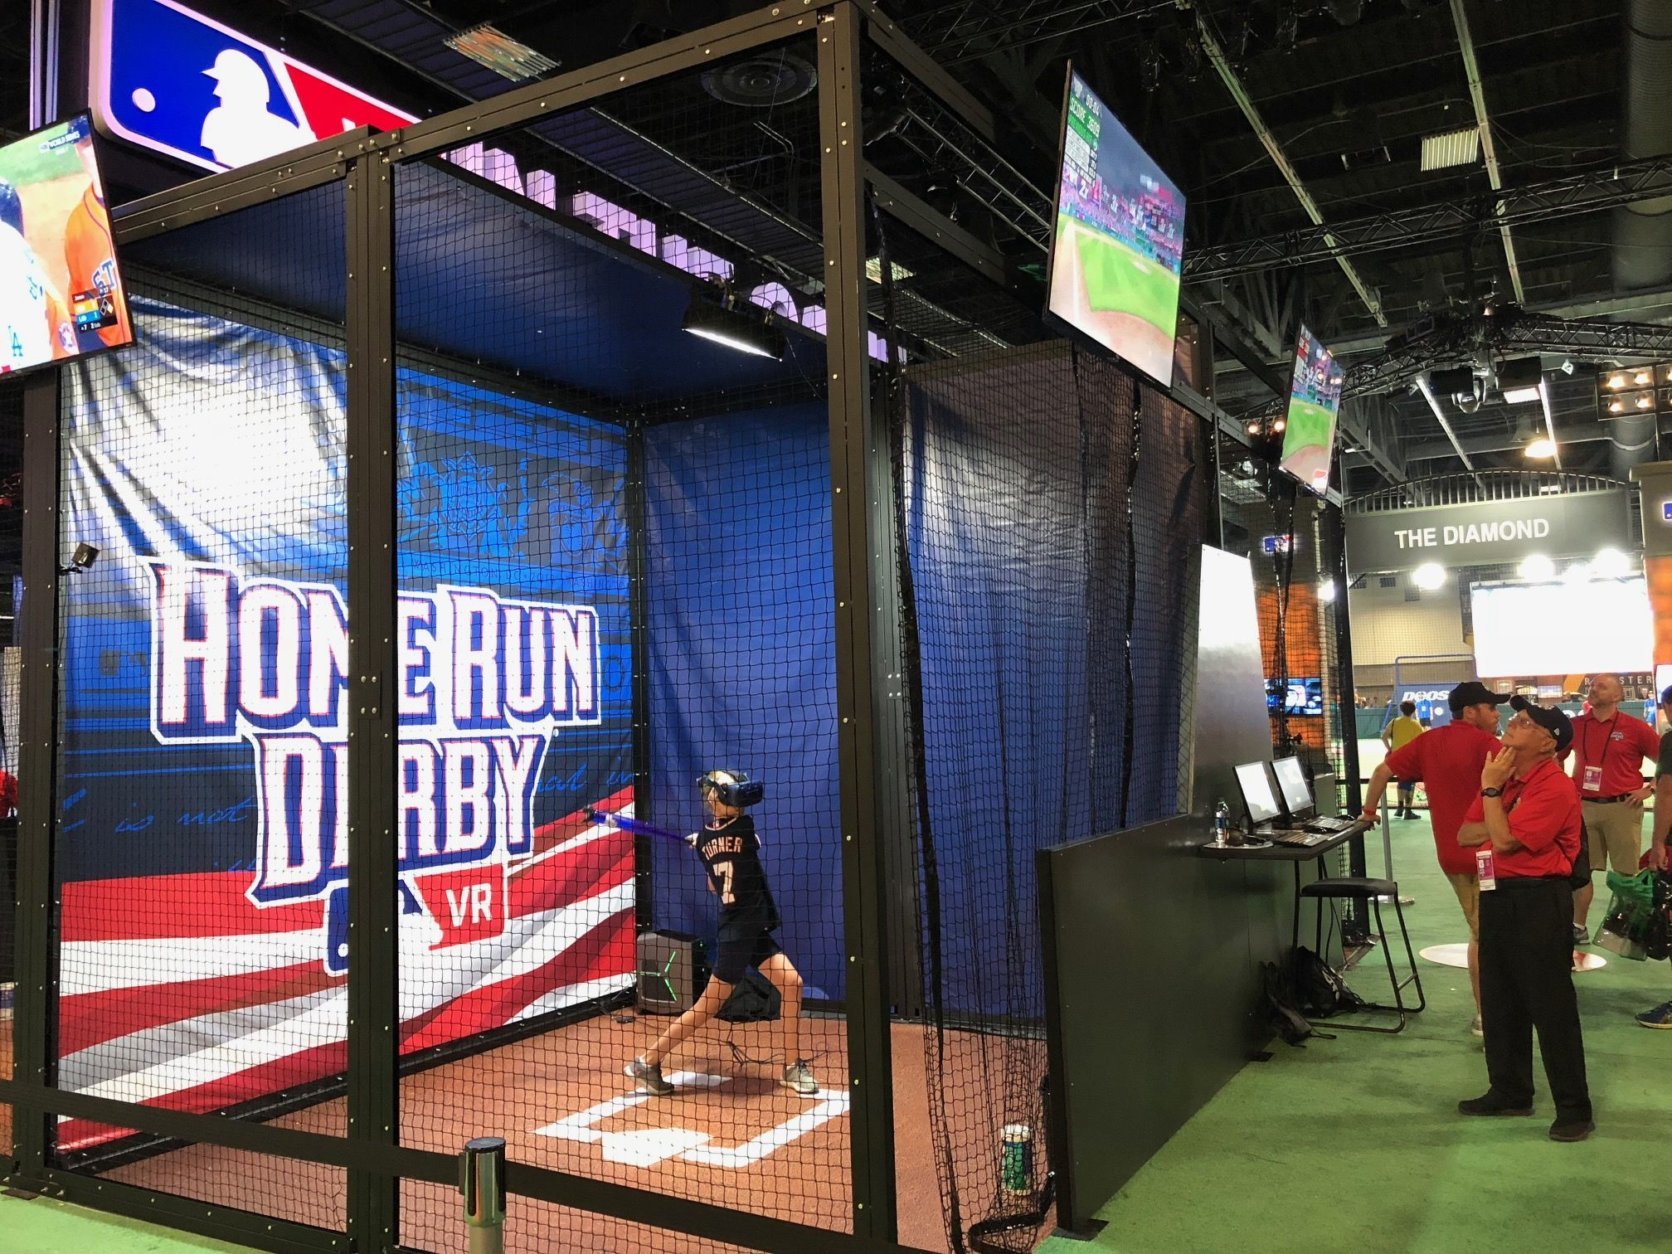 There are indoor baseball diamonds for kids, as well as batting cages and virtual reality baseball experiences. (WTOP/John Aaron)